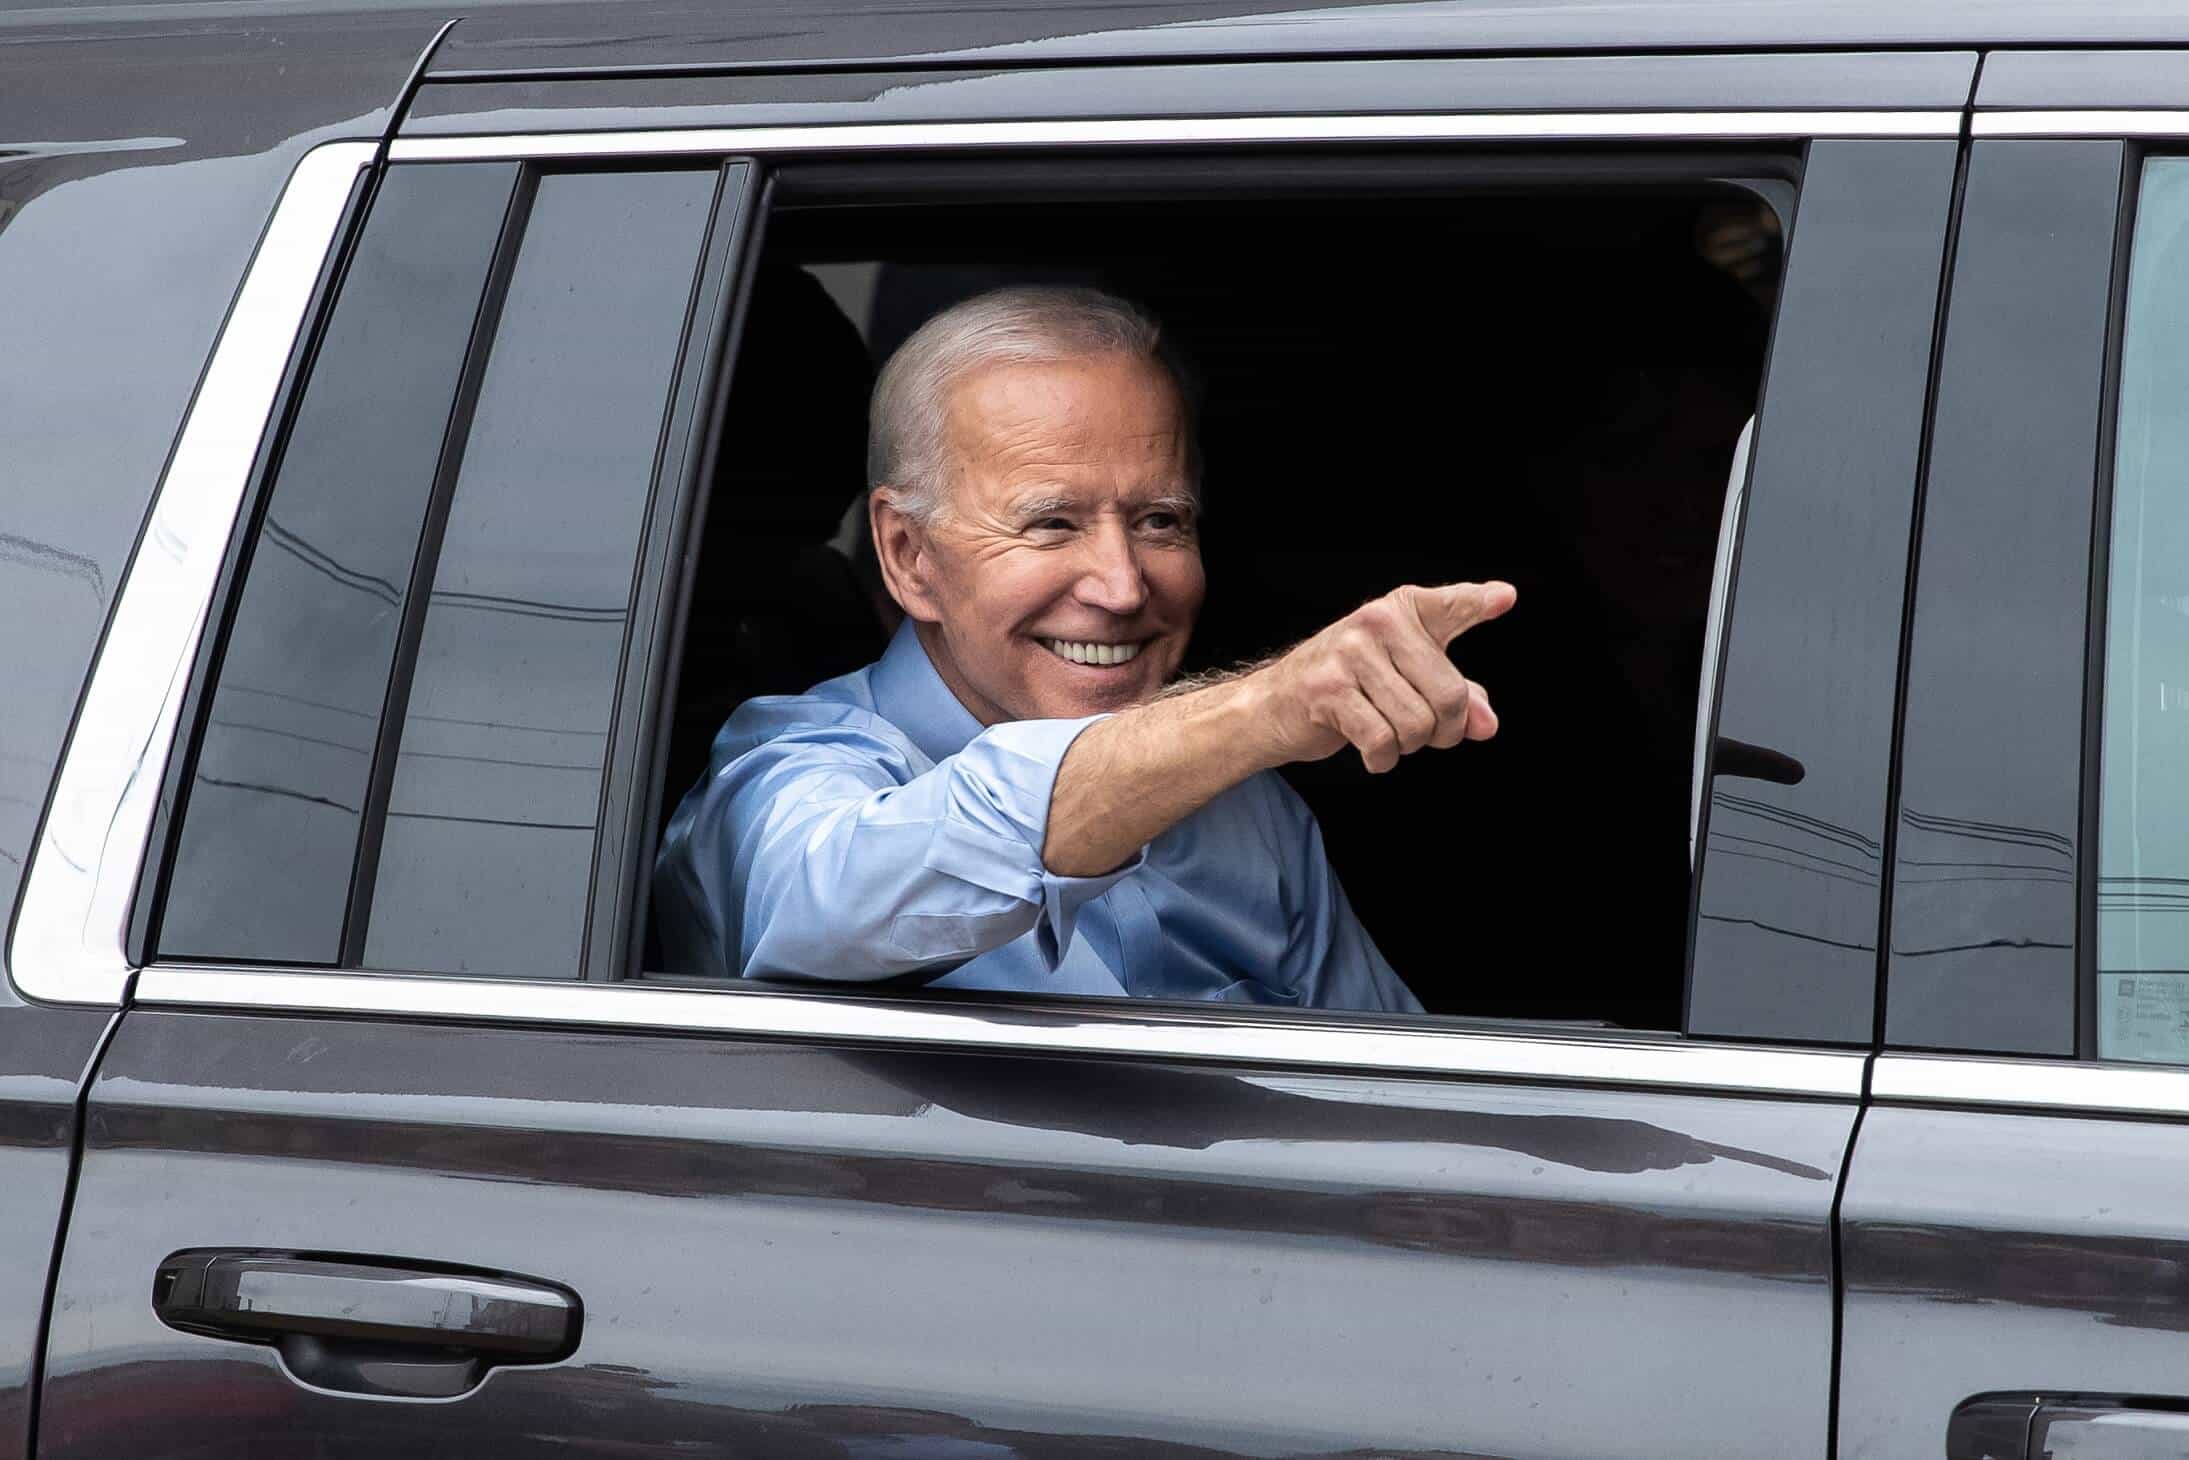 US president Joe Biden announces plans to tackle ‘junk’ fees including tickets for concerts